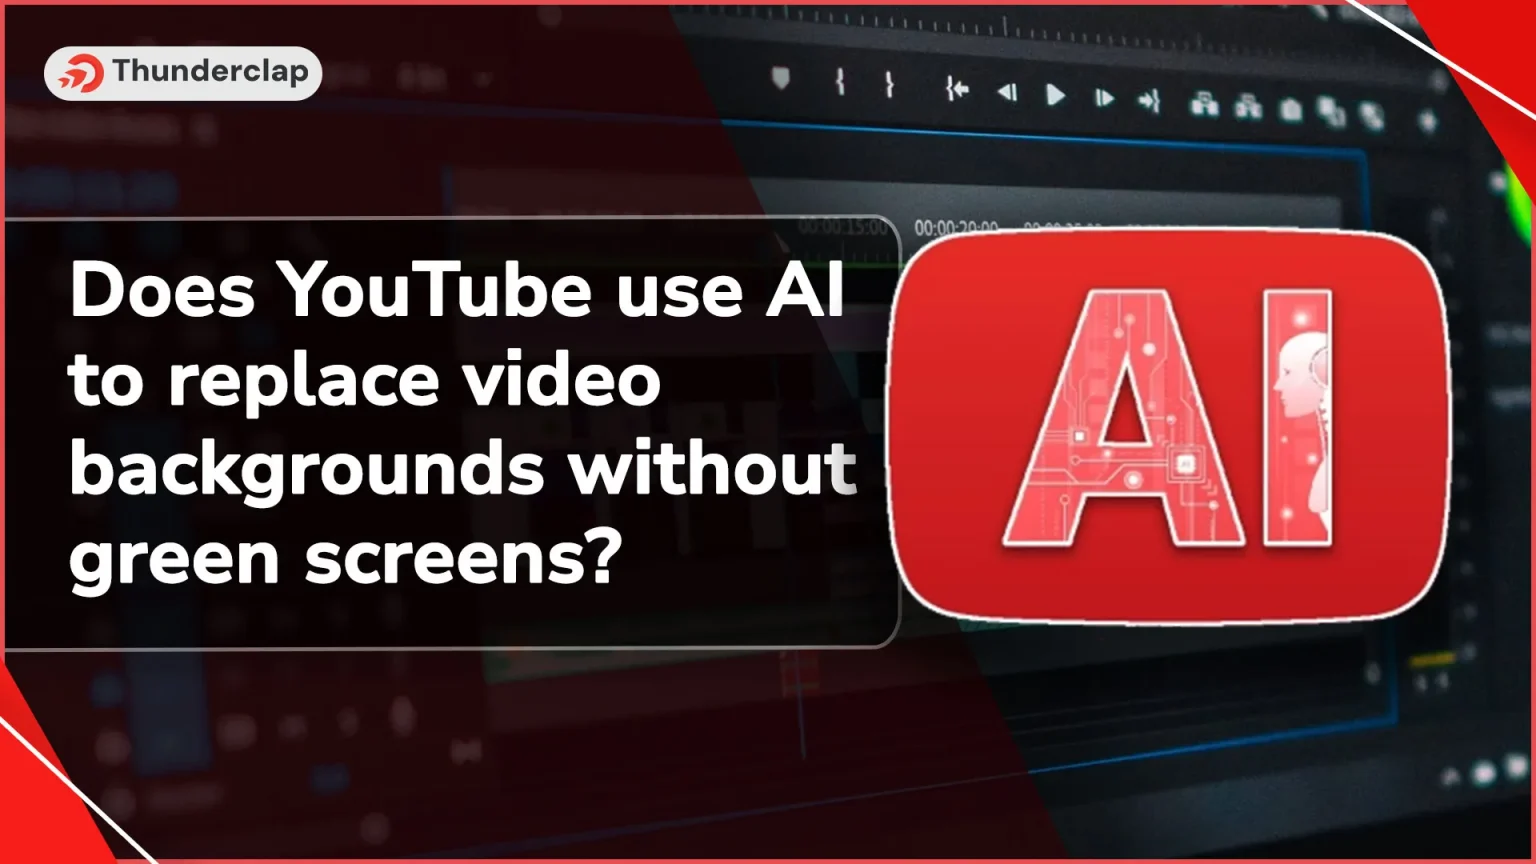 Does YouTube use AI to replace video backgrounds without green screens